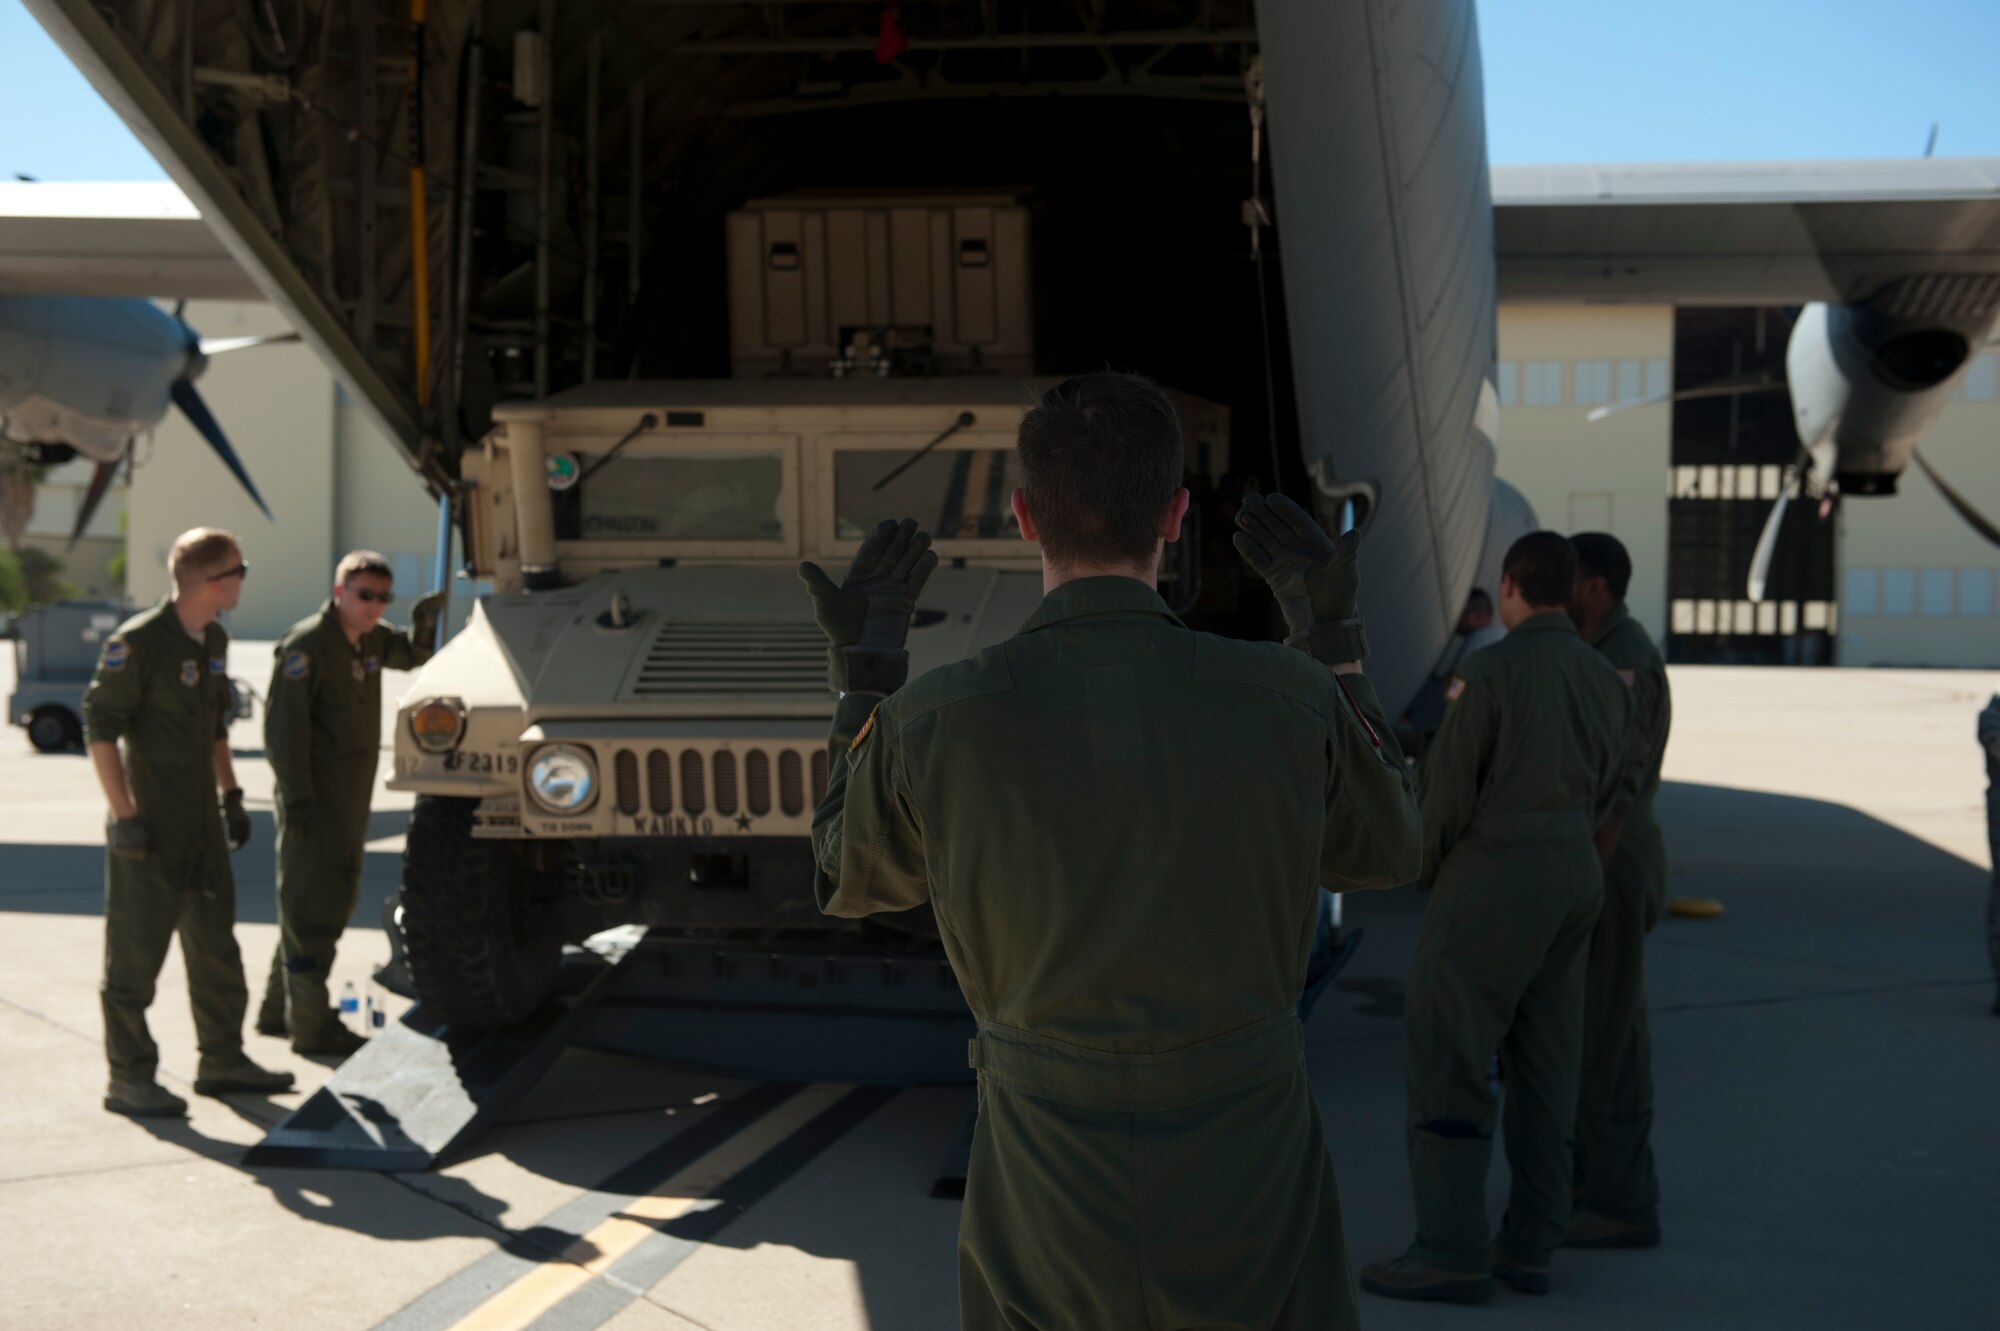 Senior Airman William Rush, a 41st Airlift Squadron loadmaster, marshals a Humvee into a C-130J Aug. 4, 2015, at March Reserve Air Force Base, Calif. The 41st AS was taking part in Operation Dragon Spear, a joint operations access exercise where their mission was to support large formation operations by providing C-130 Combat Airlift with Army assets. (U.S. Air Force photo by Senior Airman Scott Poe)